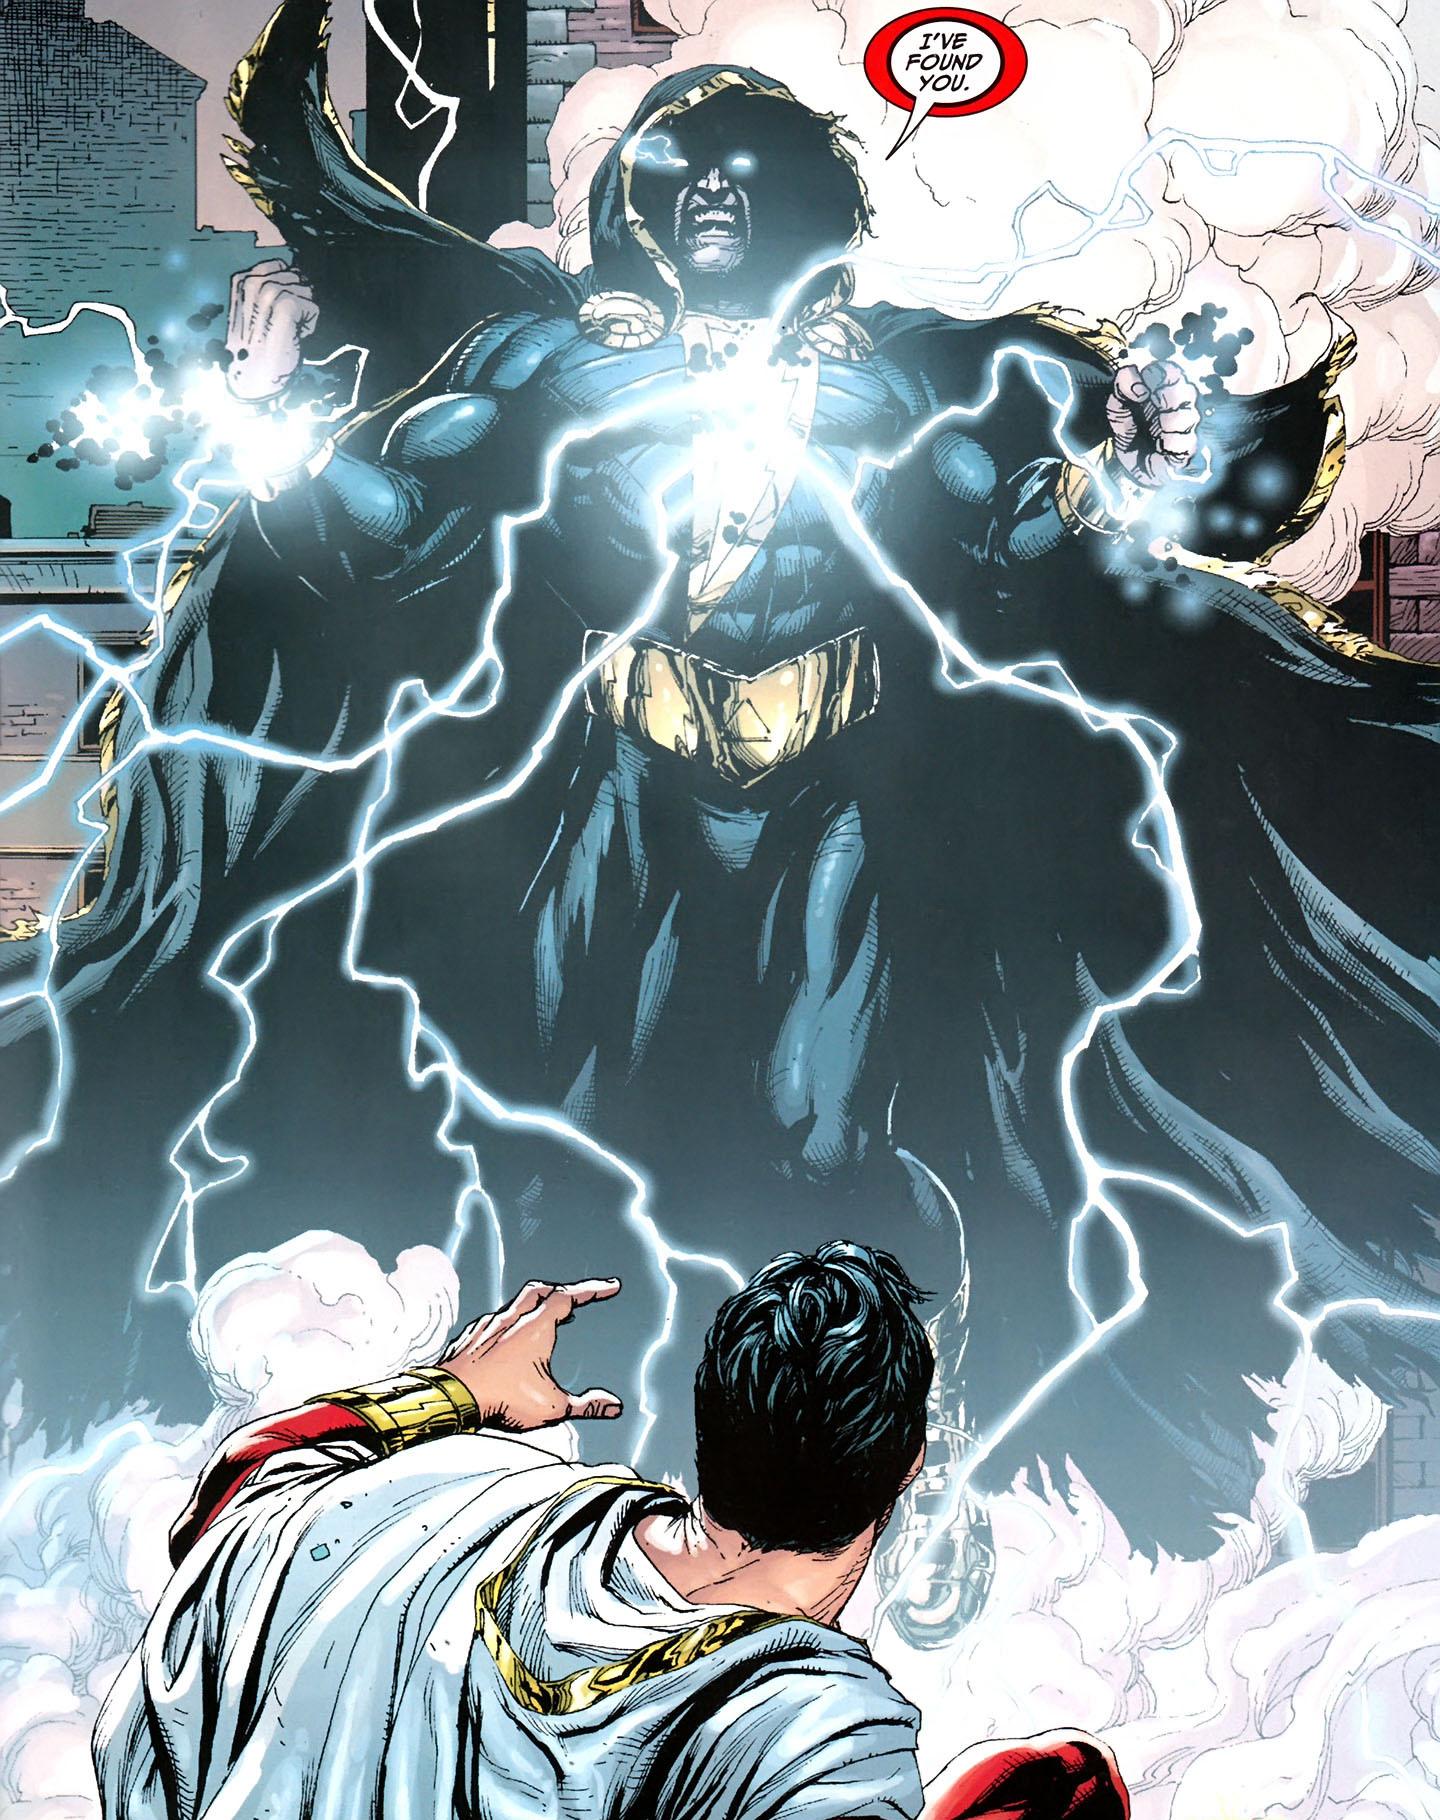 The Black Adam Wallpaper and HD Background free download on PicGaGa